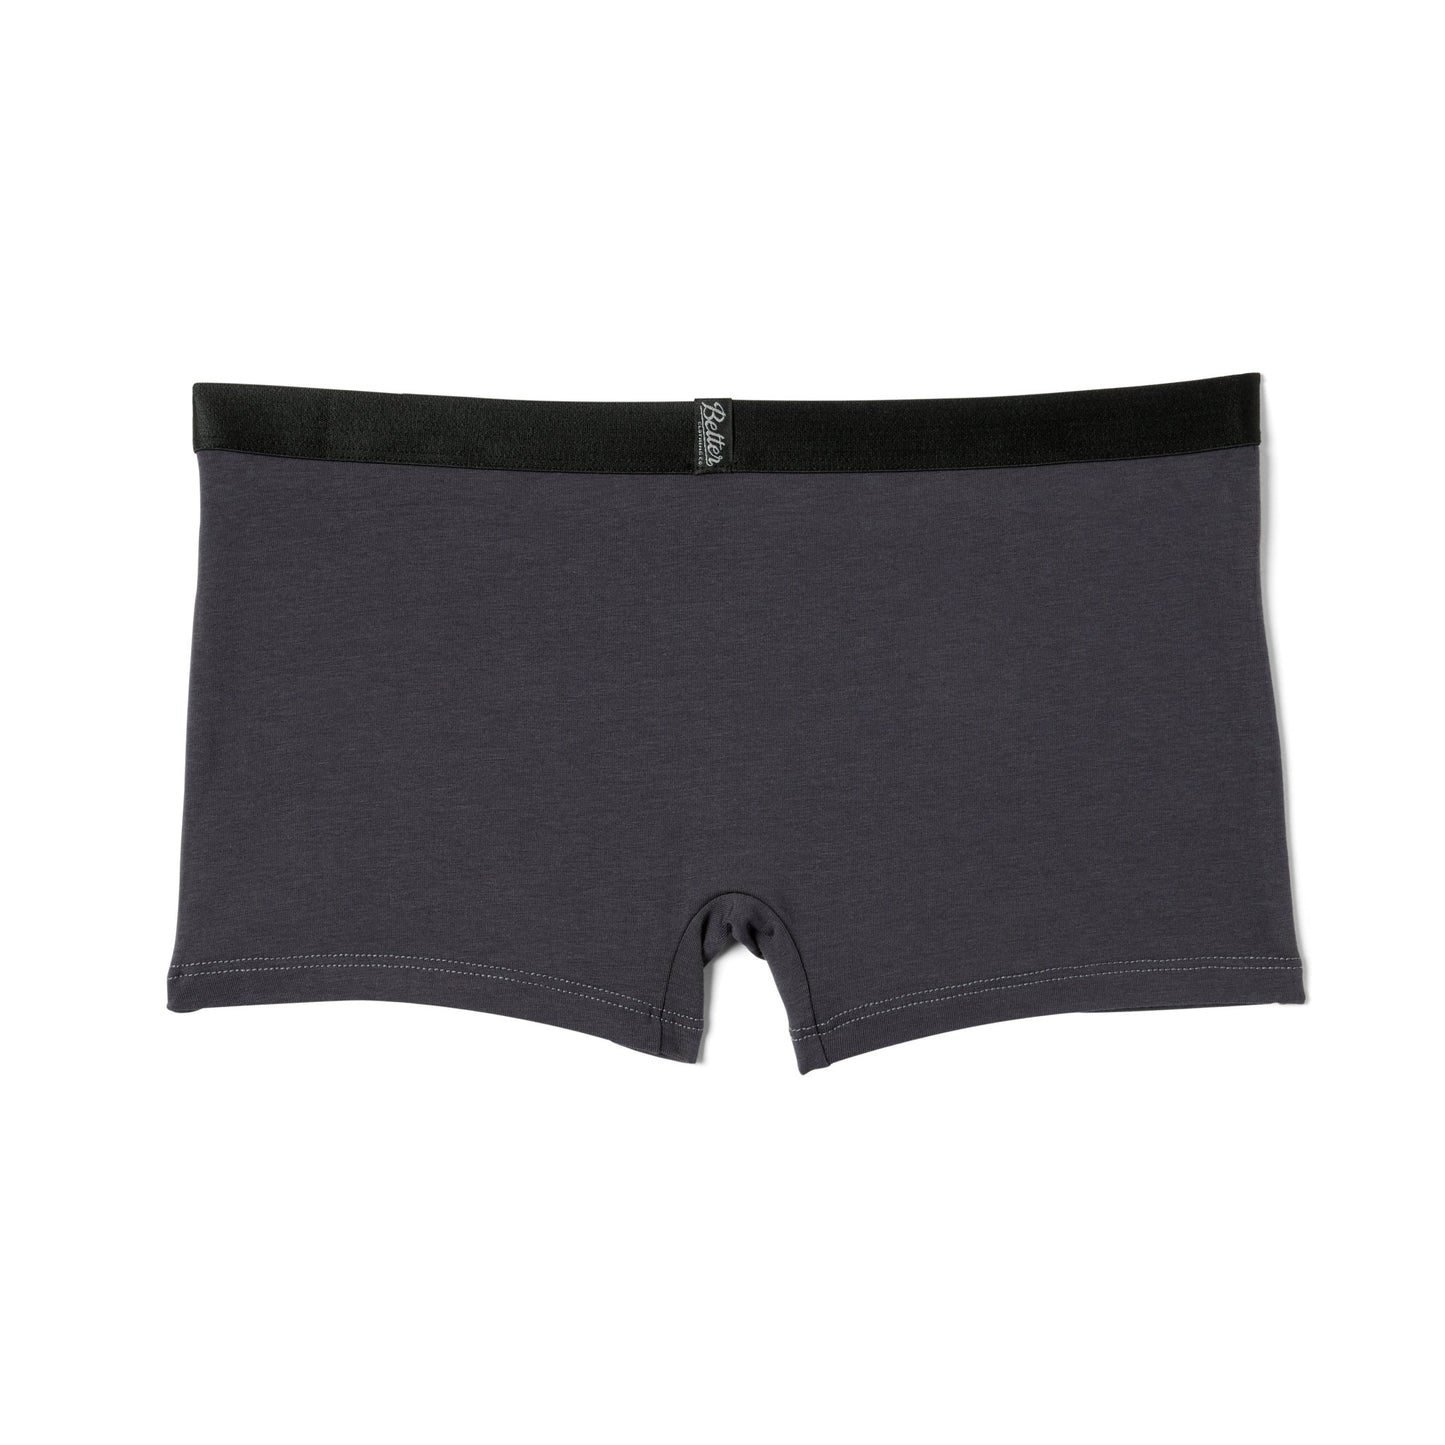 A women's Better Cotton Boyshort with black trim, offering super comfortable underwear and more coverage from Better Clothing Company.